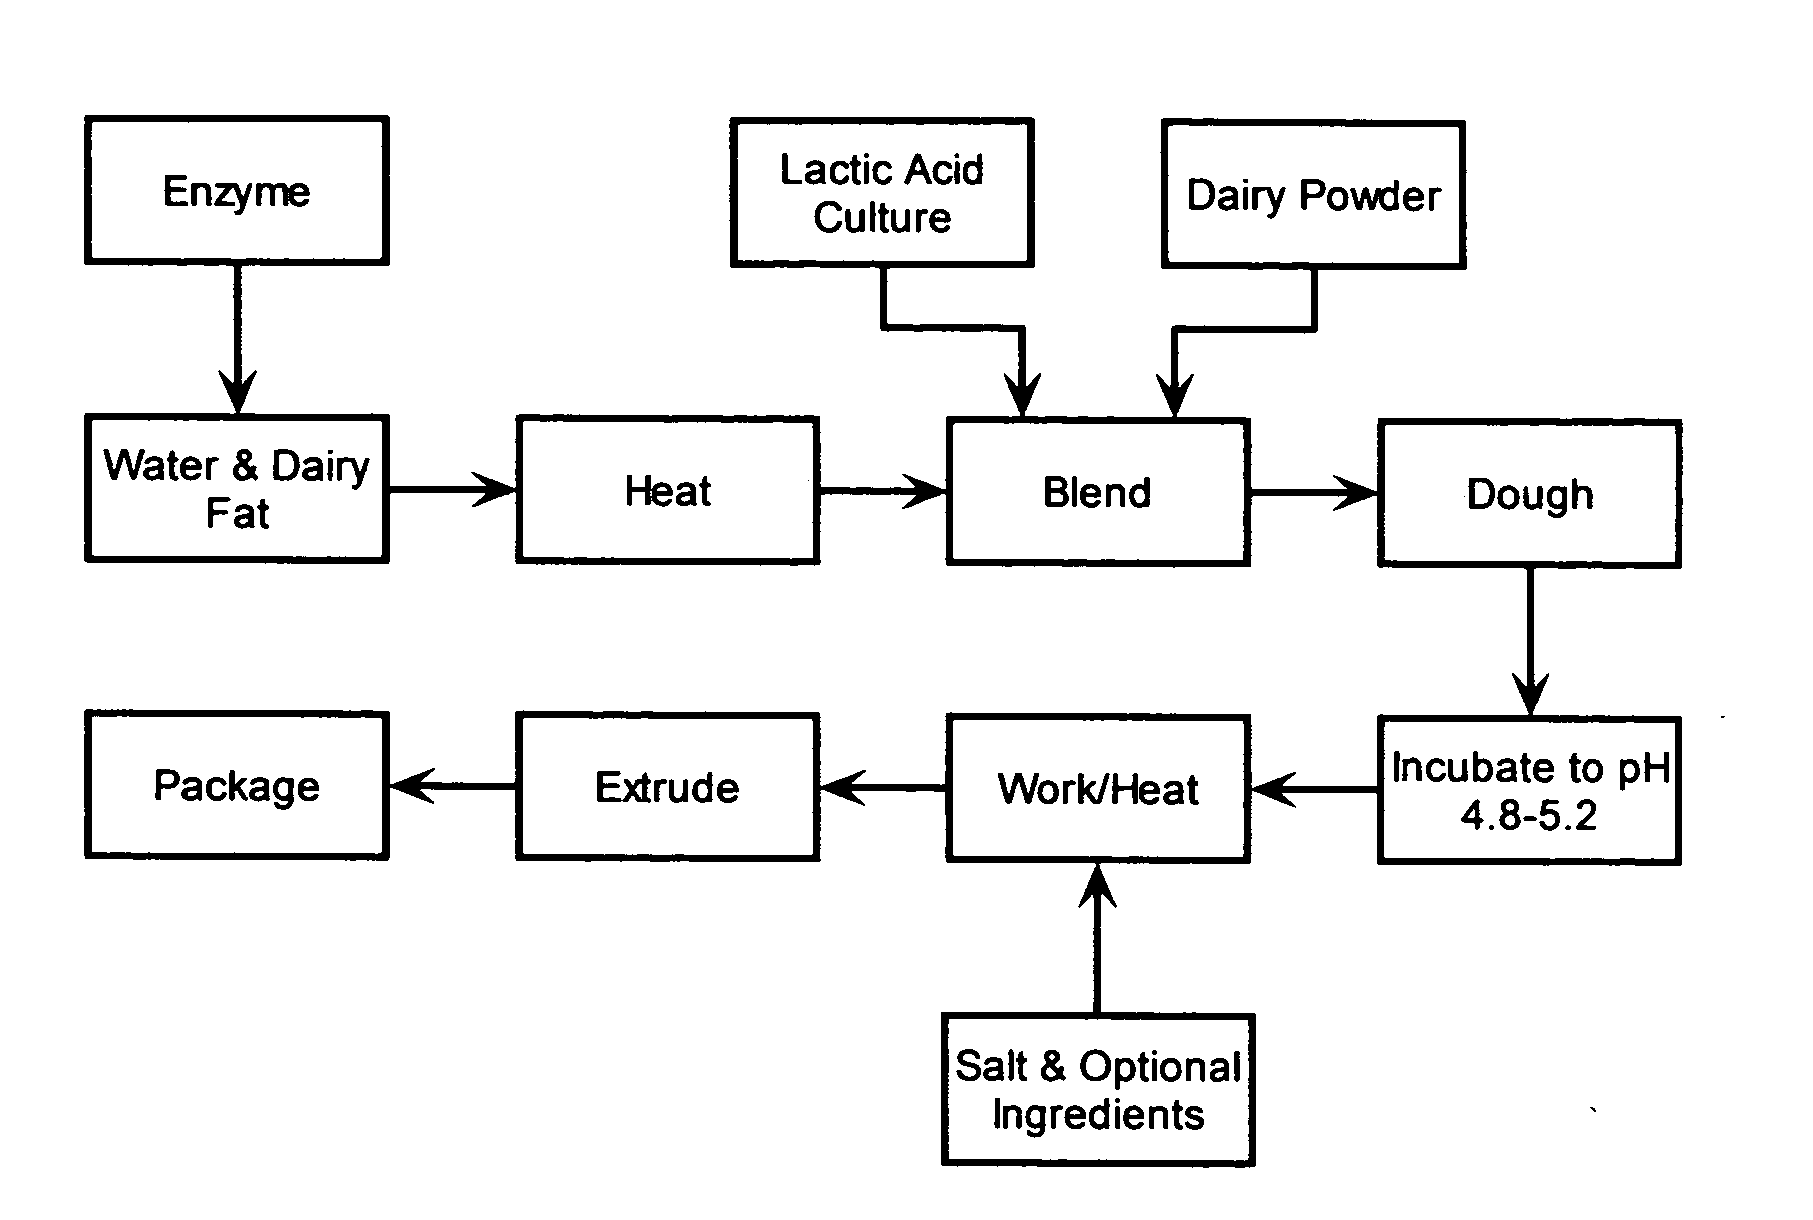 Wheyless process for the production of string cheese